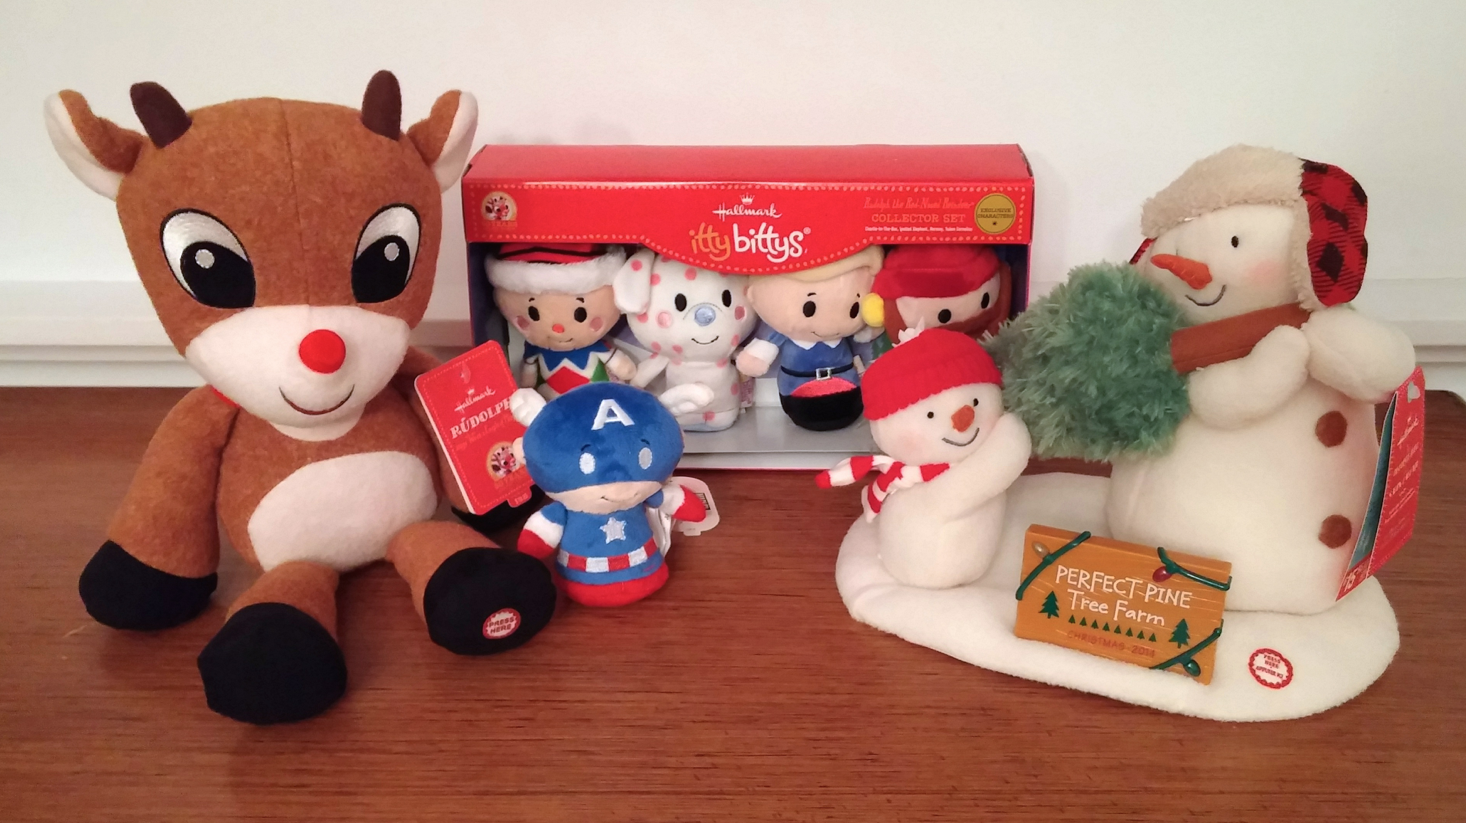 Hallmark Holiday Gifting - Rudolph 50th Anniversary itty bittys Collector Set